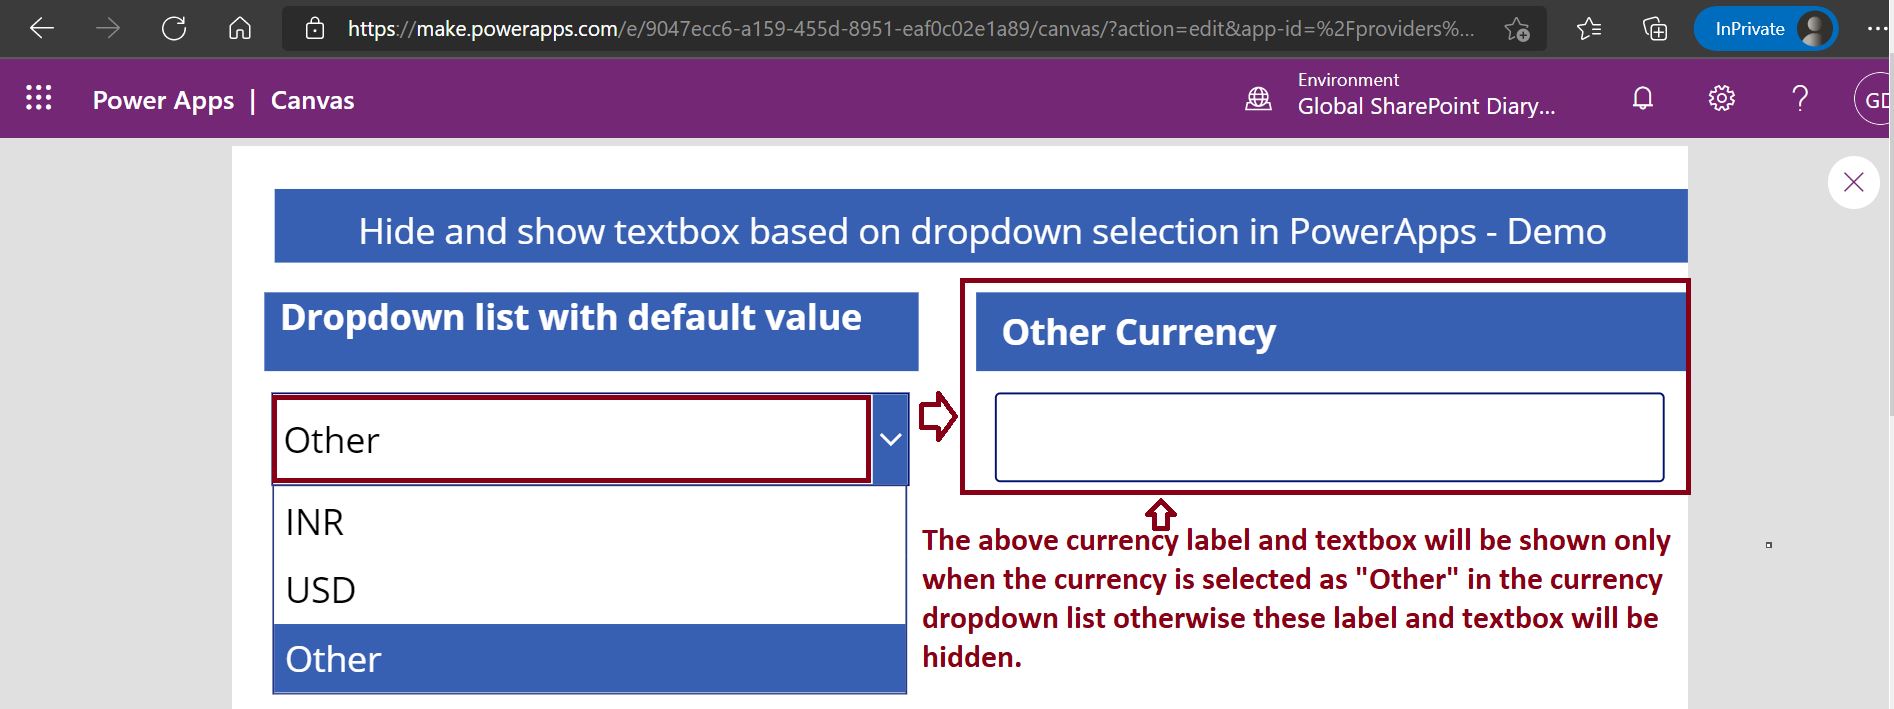 Hide and show textbox based on the dropdown list selection in PowerApps - demo